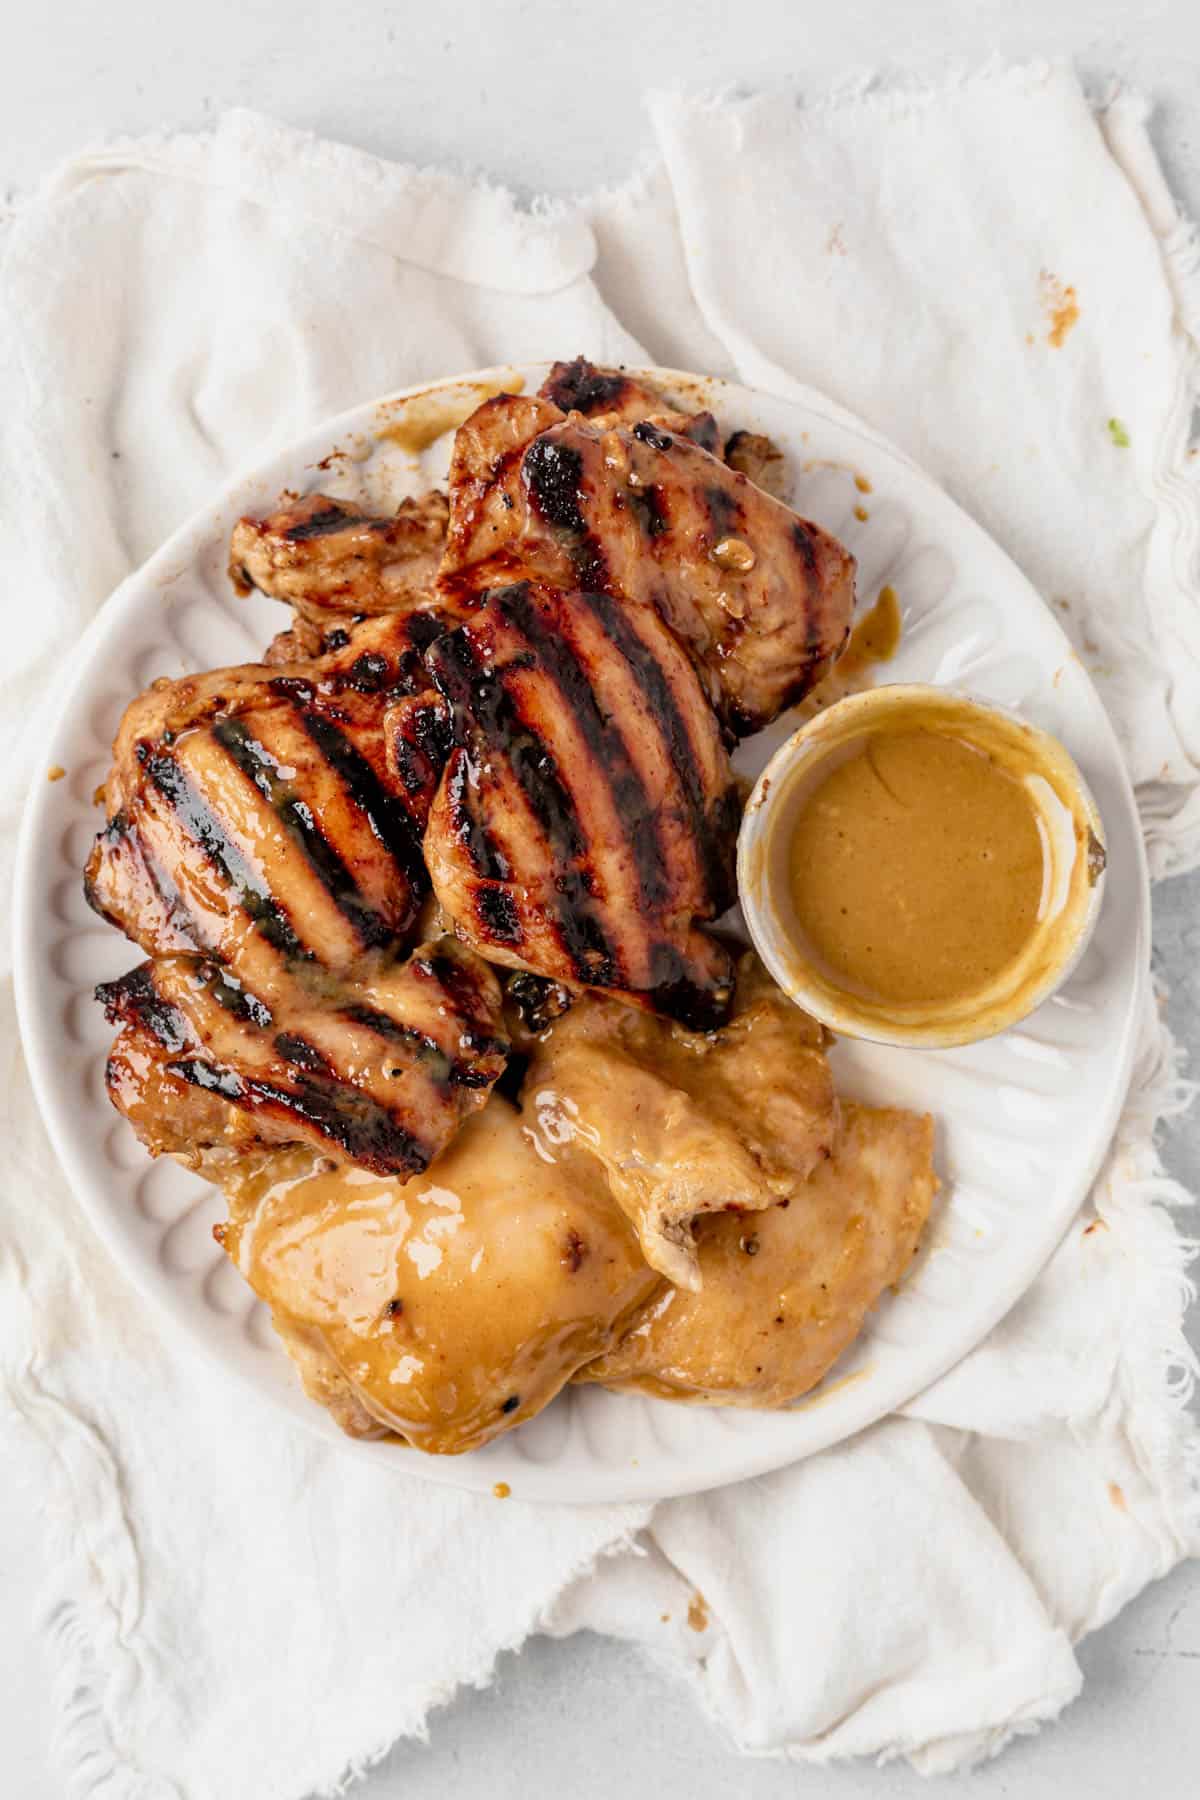 grilled and baked marinated chicken